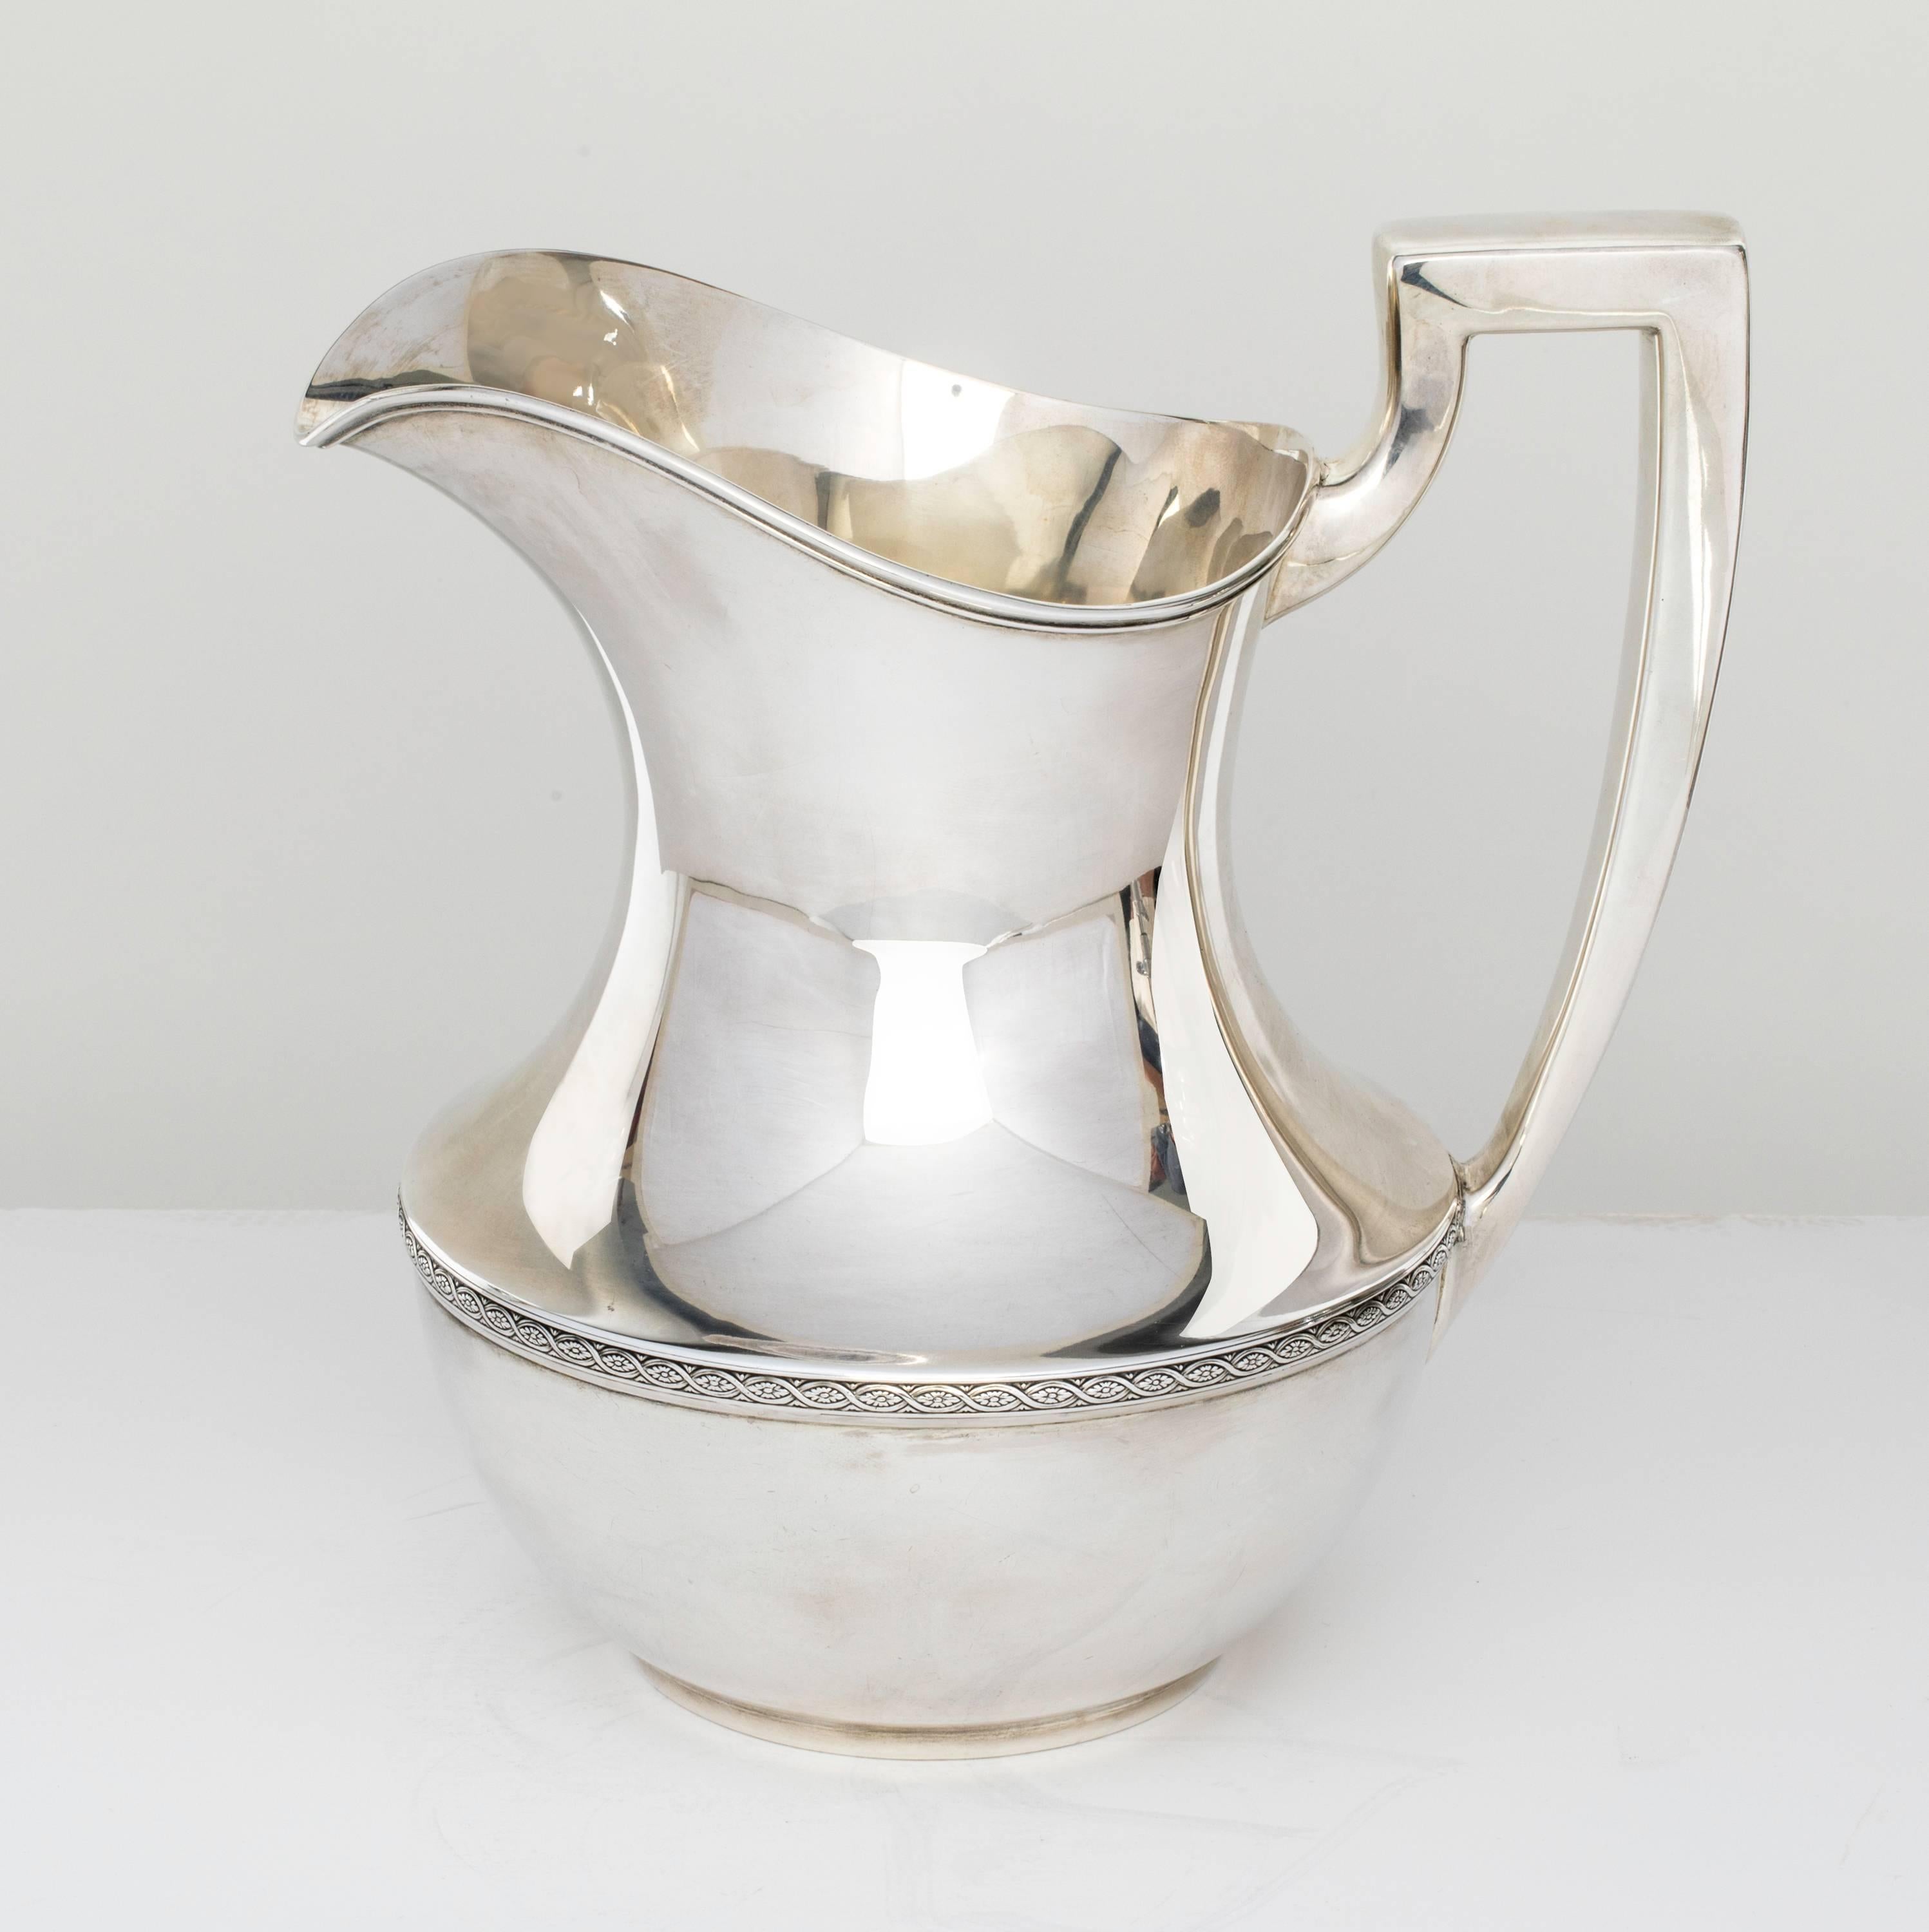 Weidlich of Bridgeport Connecticut, circa 1930s sterling silver water pitcher. Beautiful and simply shaped body with squared handle.
In excellent condition.